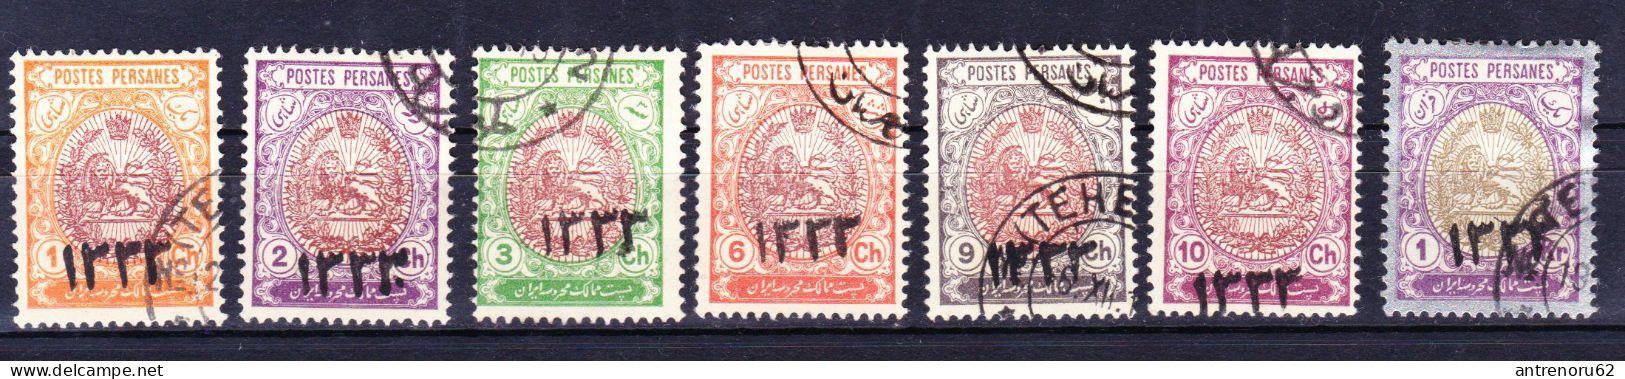 STAMPS-IRAN-1915-USED-SEE-SCAN - Iran